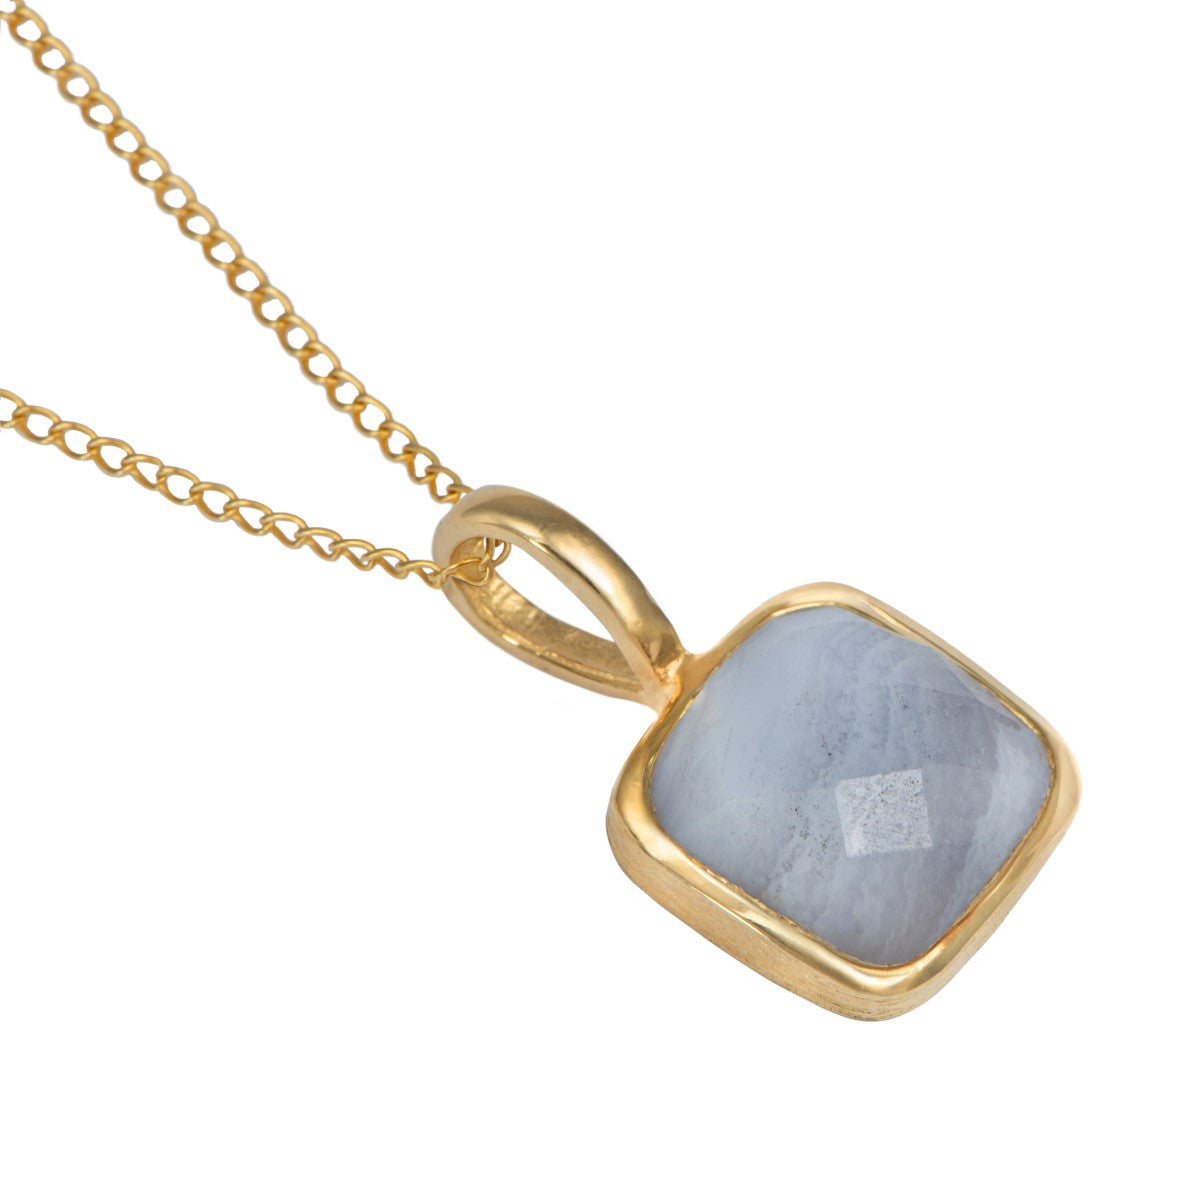 Gold Plated Sterling Silver Pendant Necklace with a Faceted Square Gemstone - Blue Laced Agate